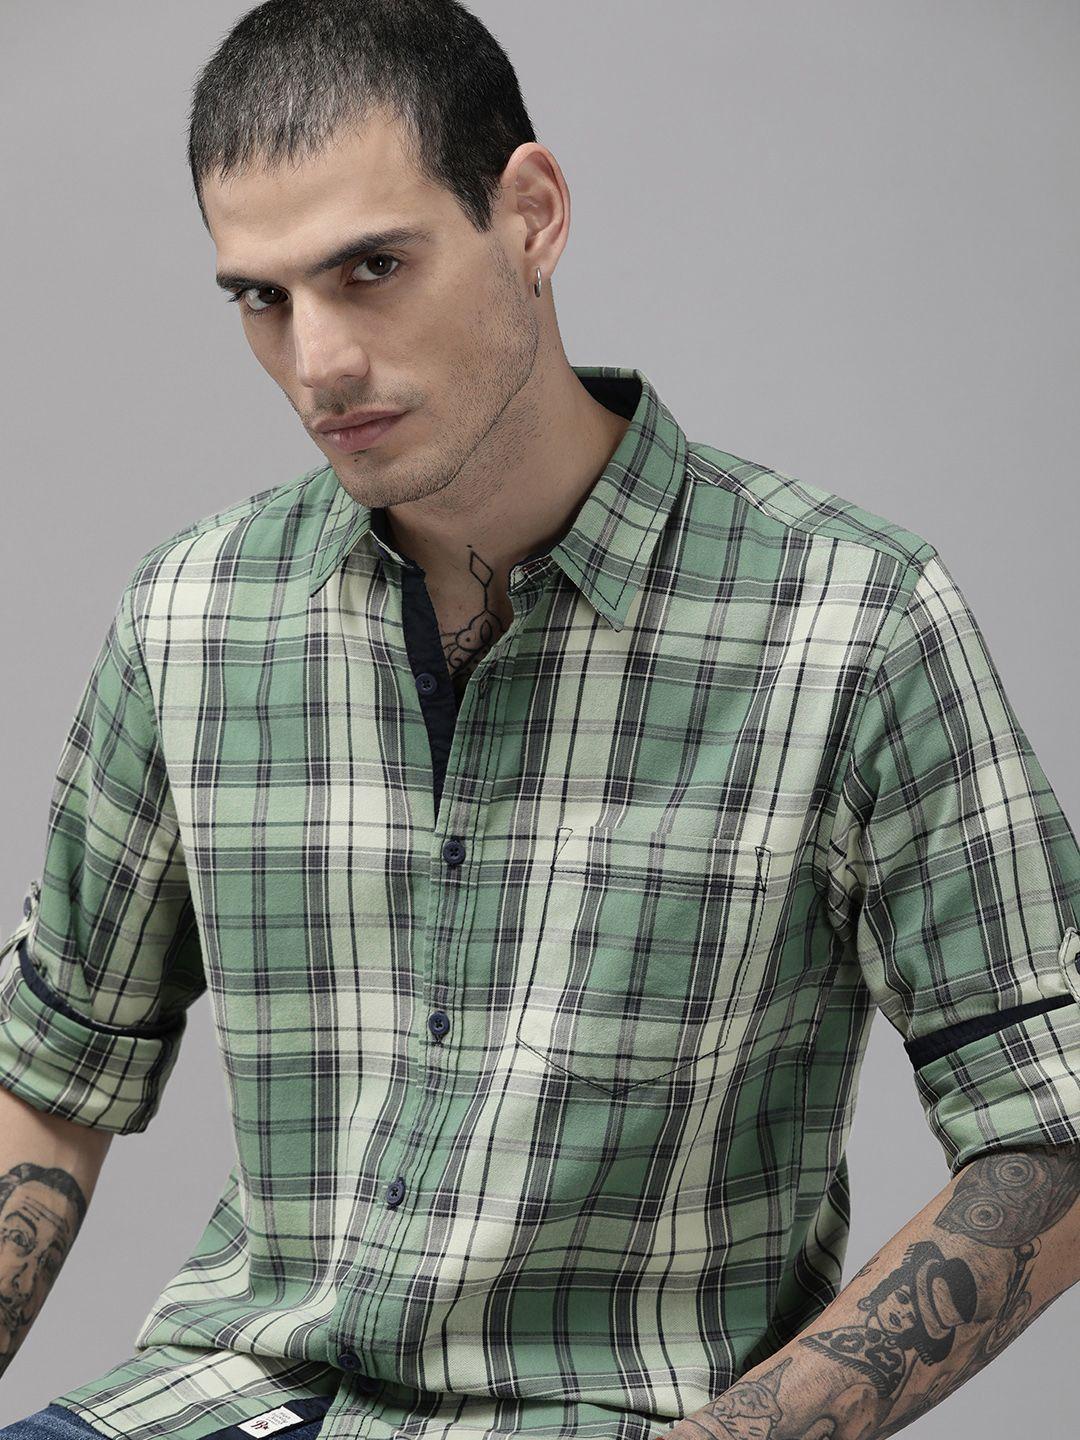 the-roadster-lifestyle-co.-men-green-&-black-checked-pure-cotton-casual-shirt